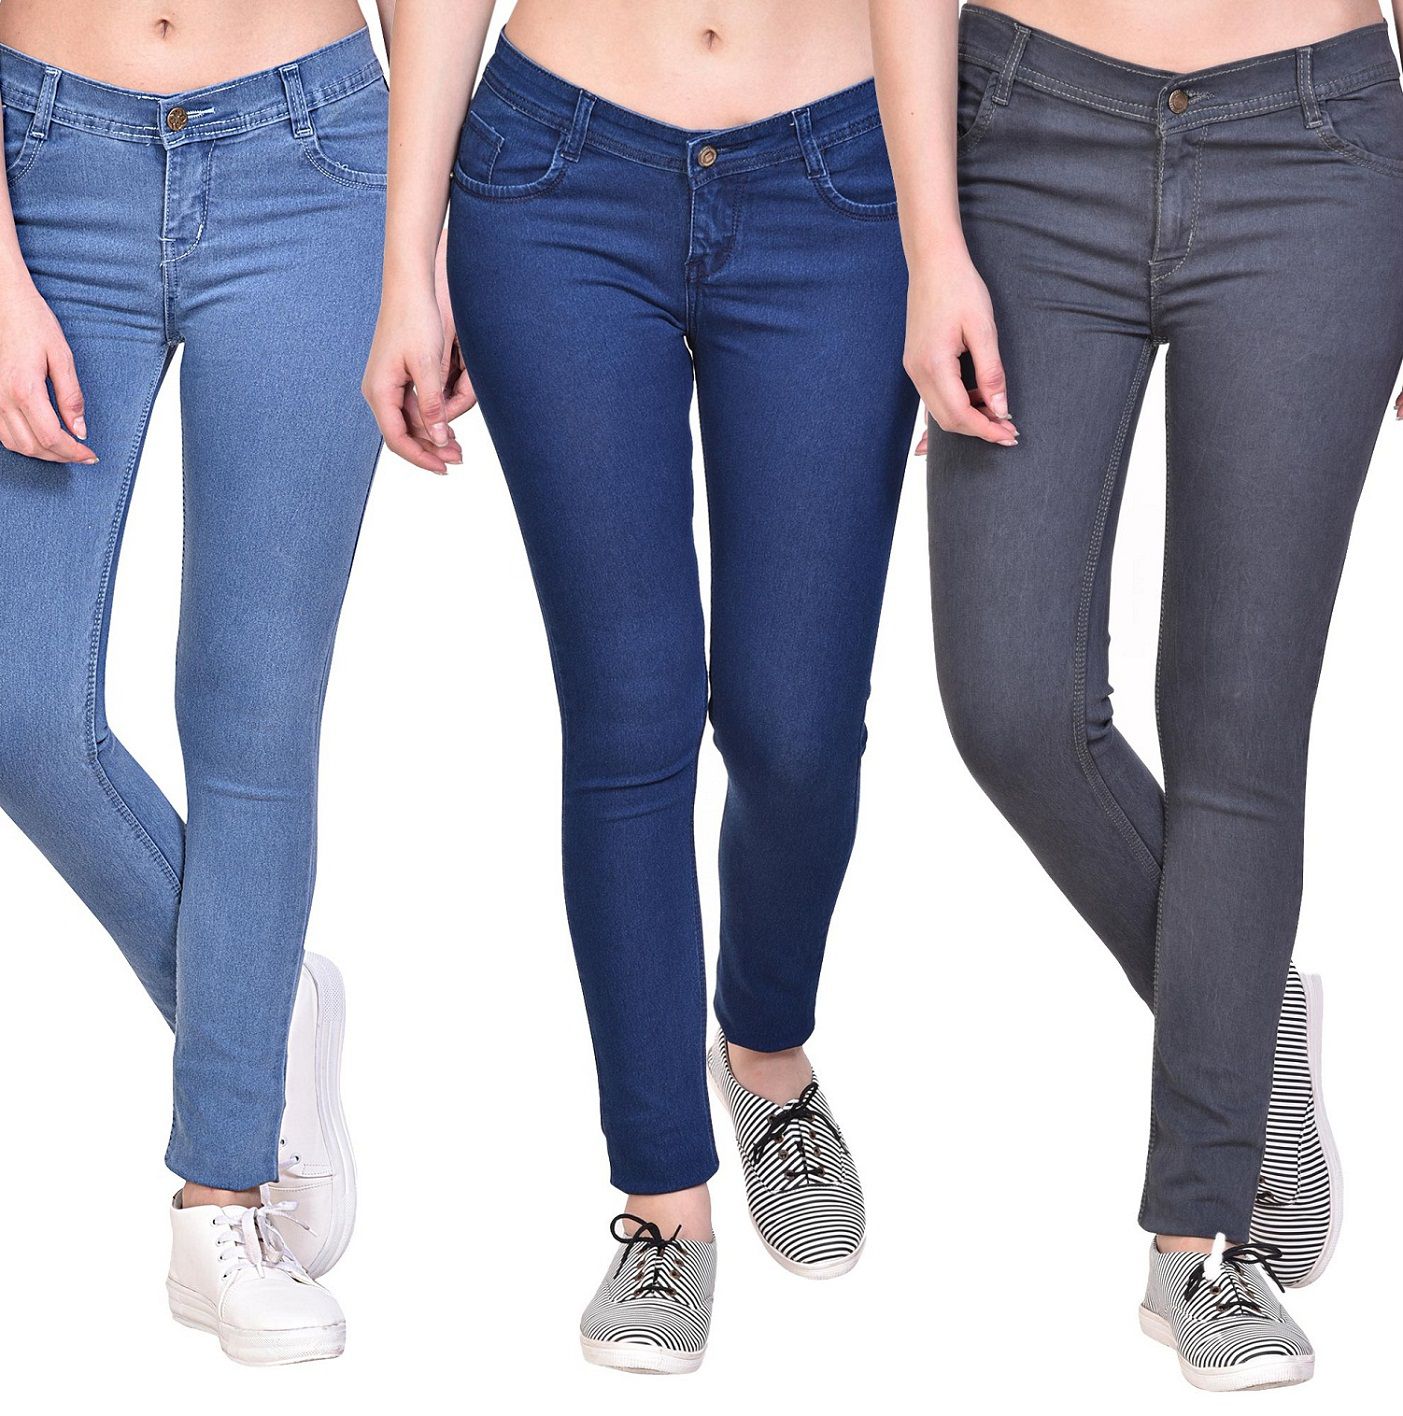 Buy NJs Denim Jeans - Multi Color Online at Best Prices in India - Snapdeal